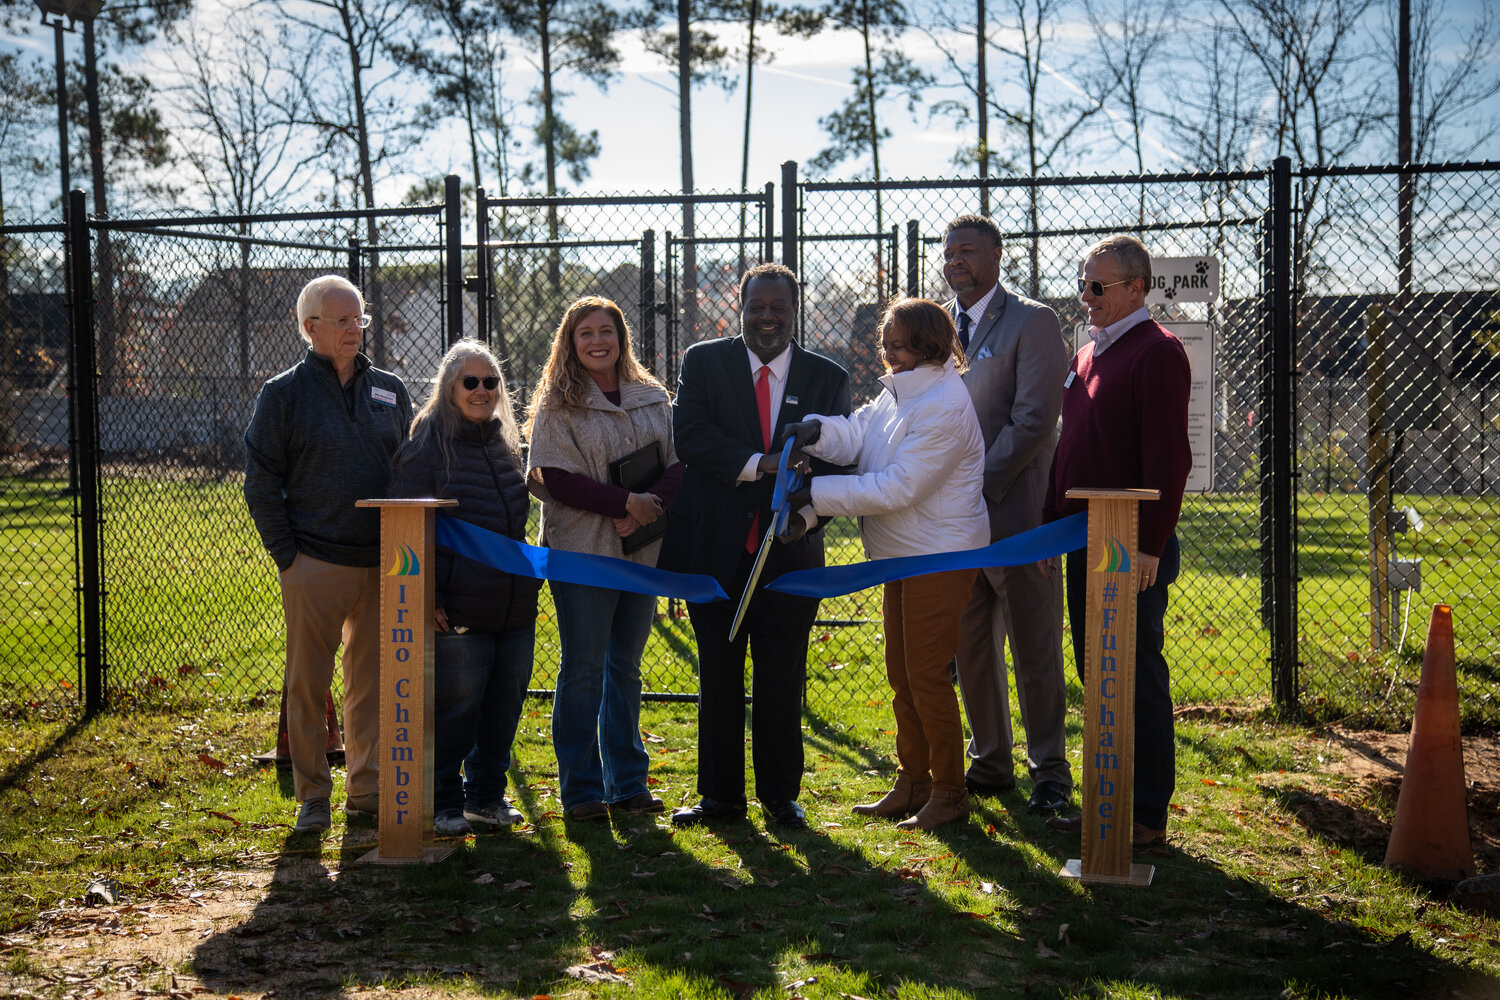 Irmo held a ribbon cutting last week for its first official dog park.